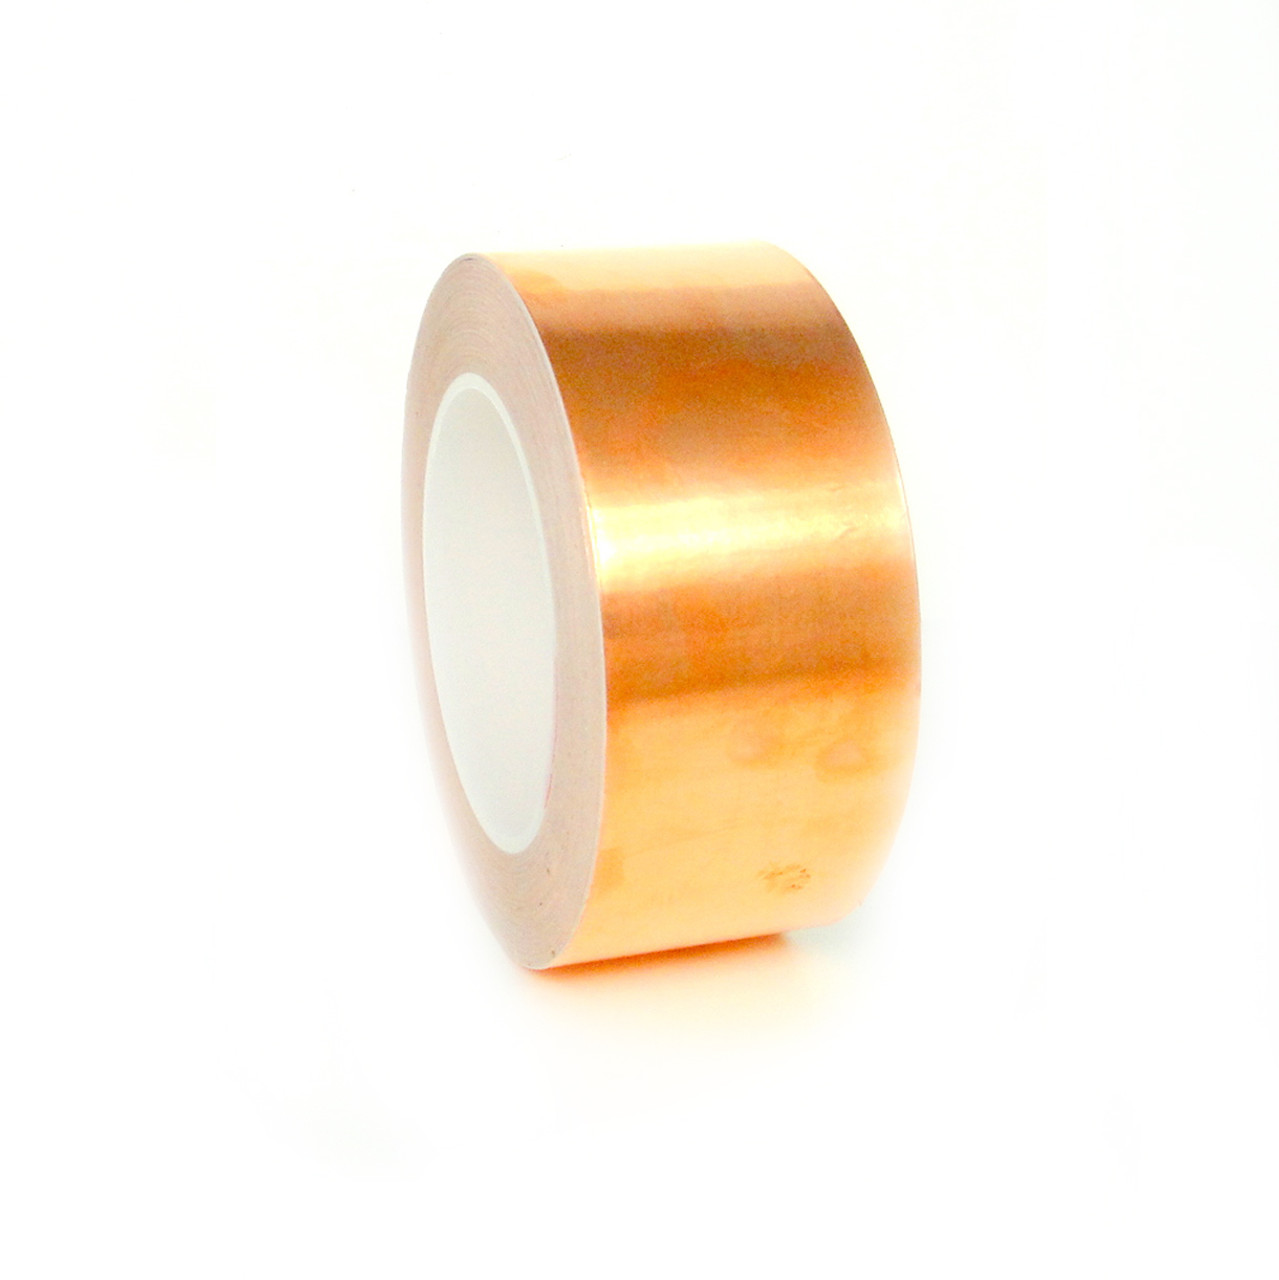 TapeCase M-0.125 X 18YD Green Polyester/Silicone Adhesive Tape 18 yd Length 0.125 Width